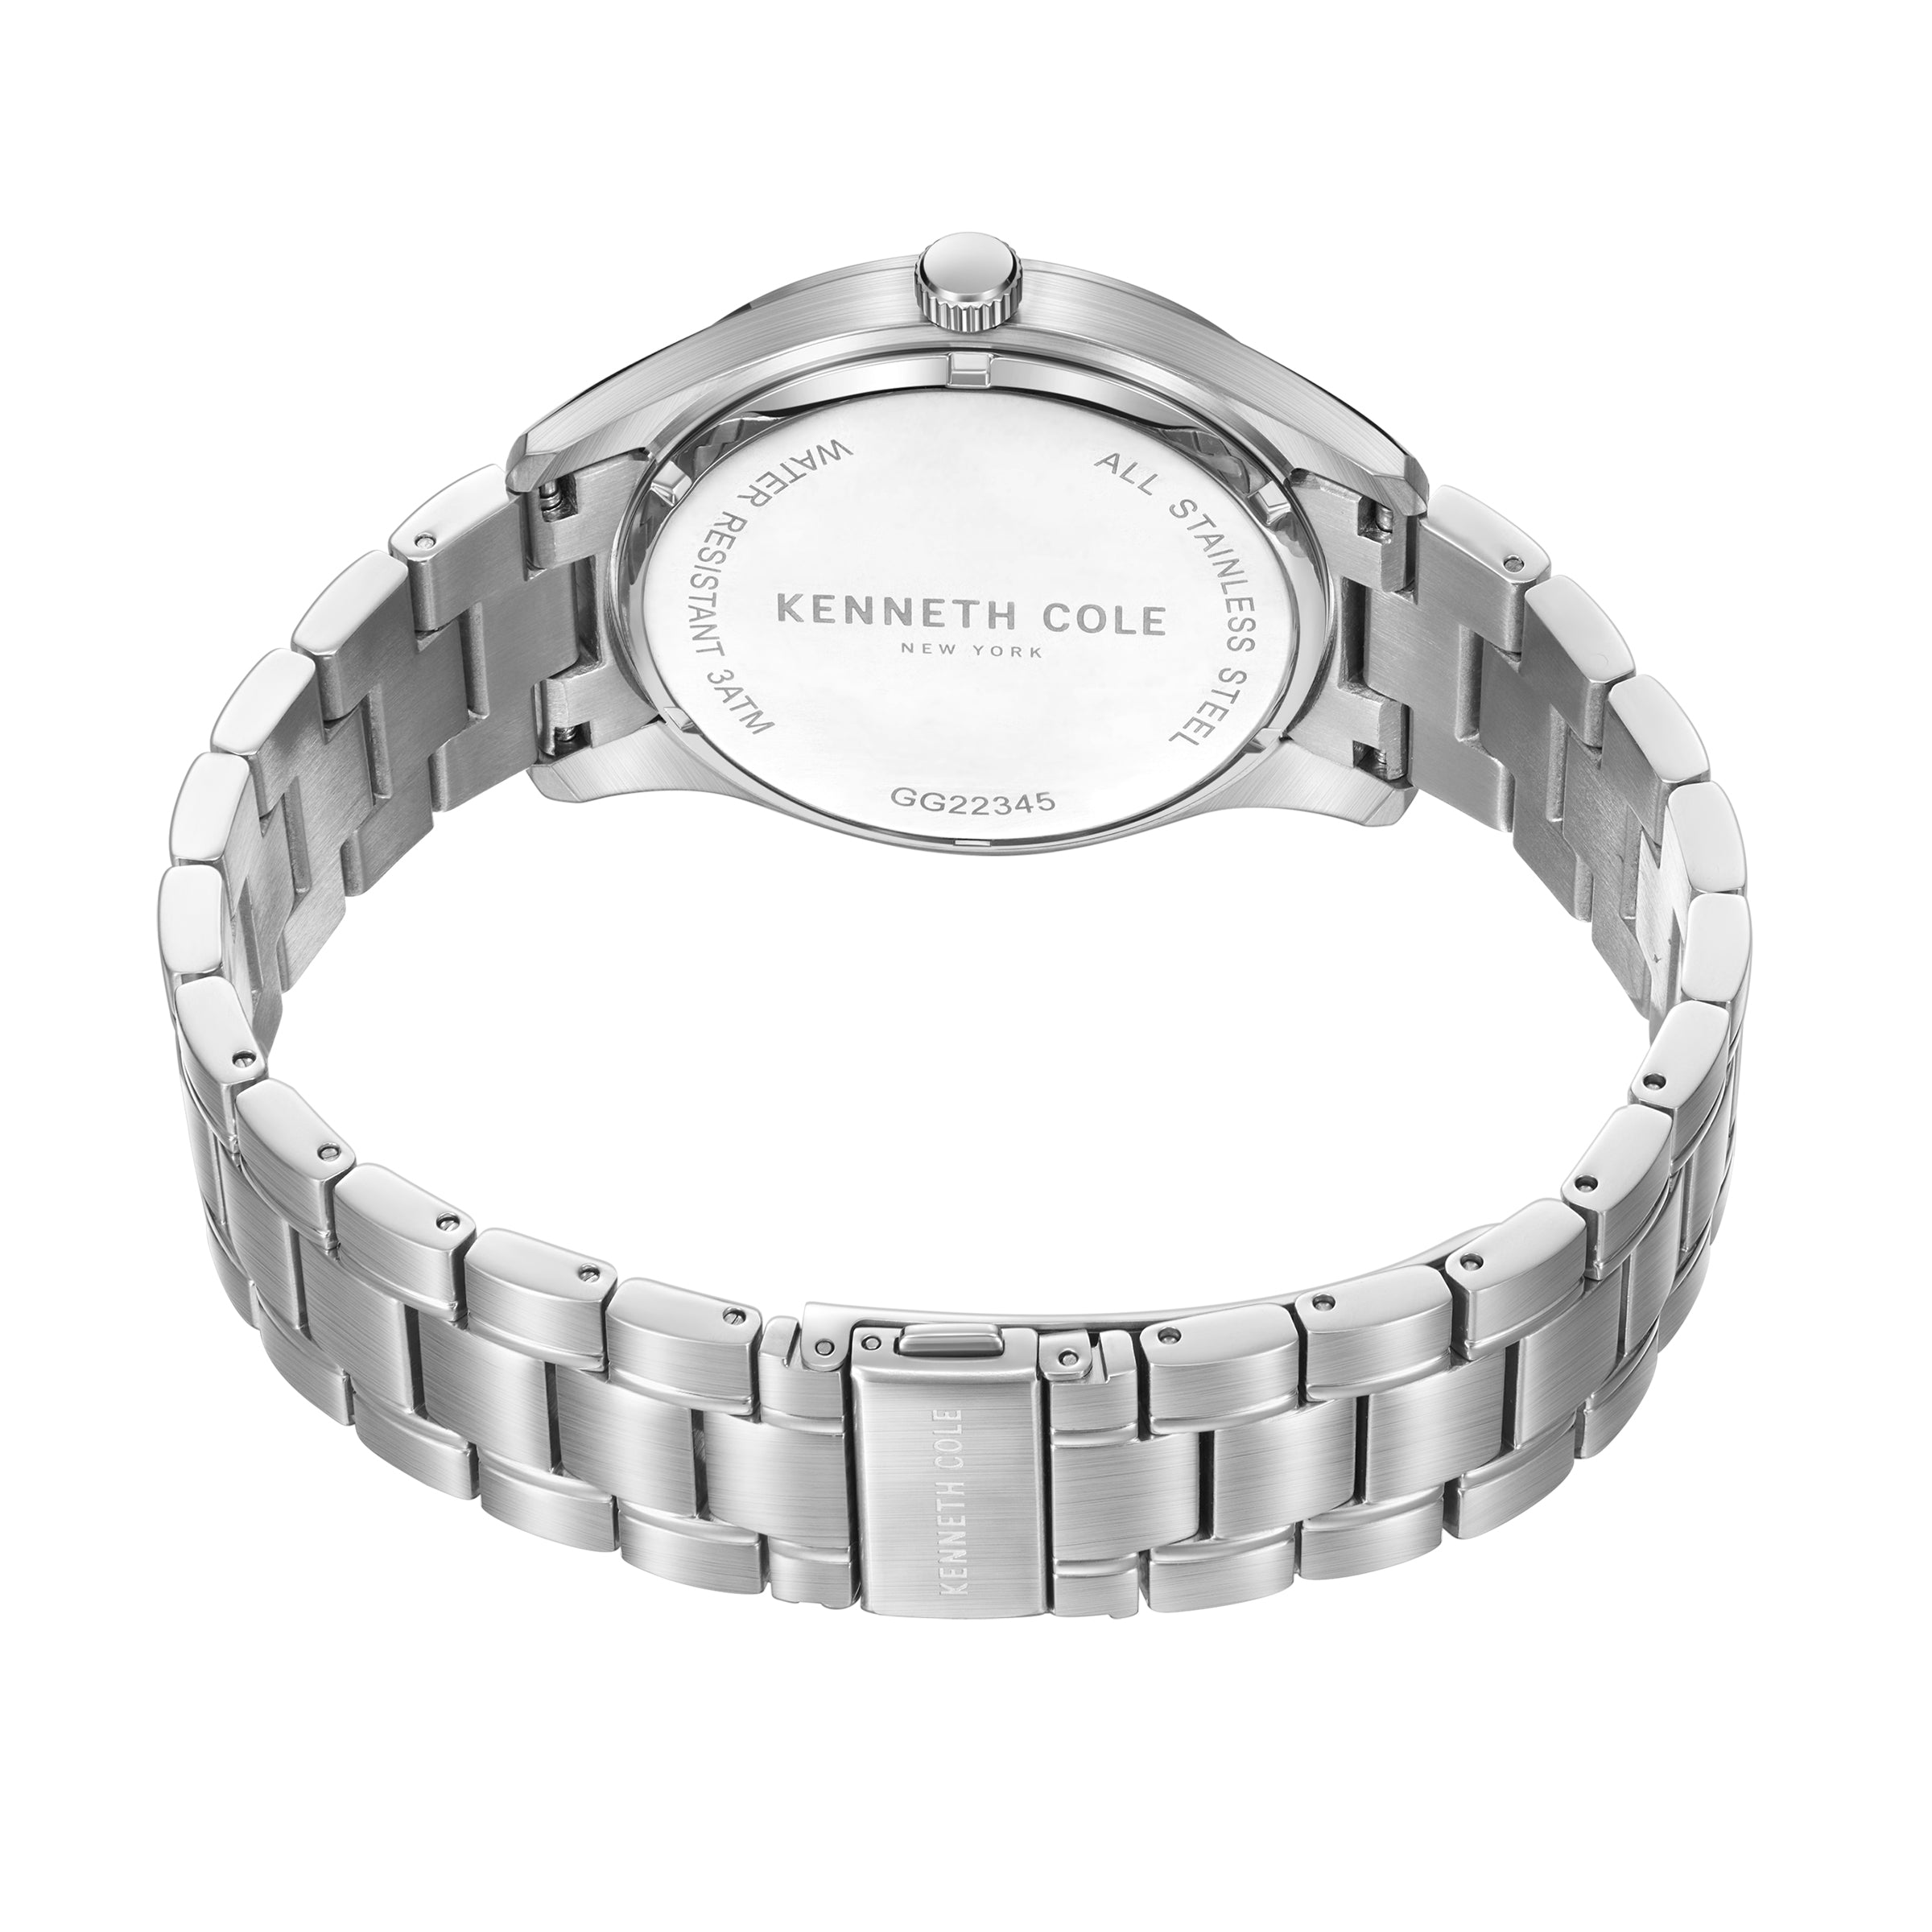 Kenneth Cole New York KCWGG2234503- Stainless Steel Wrist Watch for Men